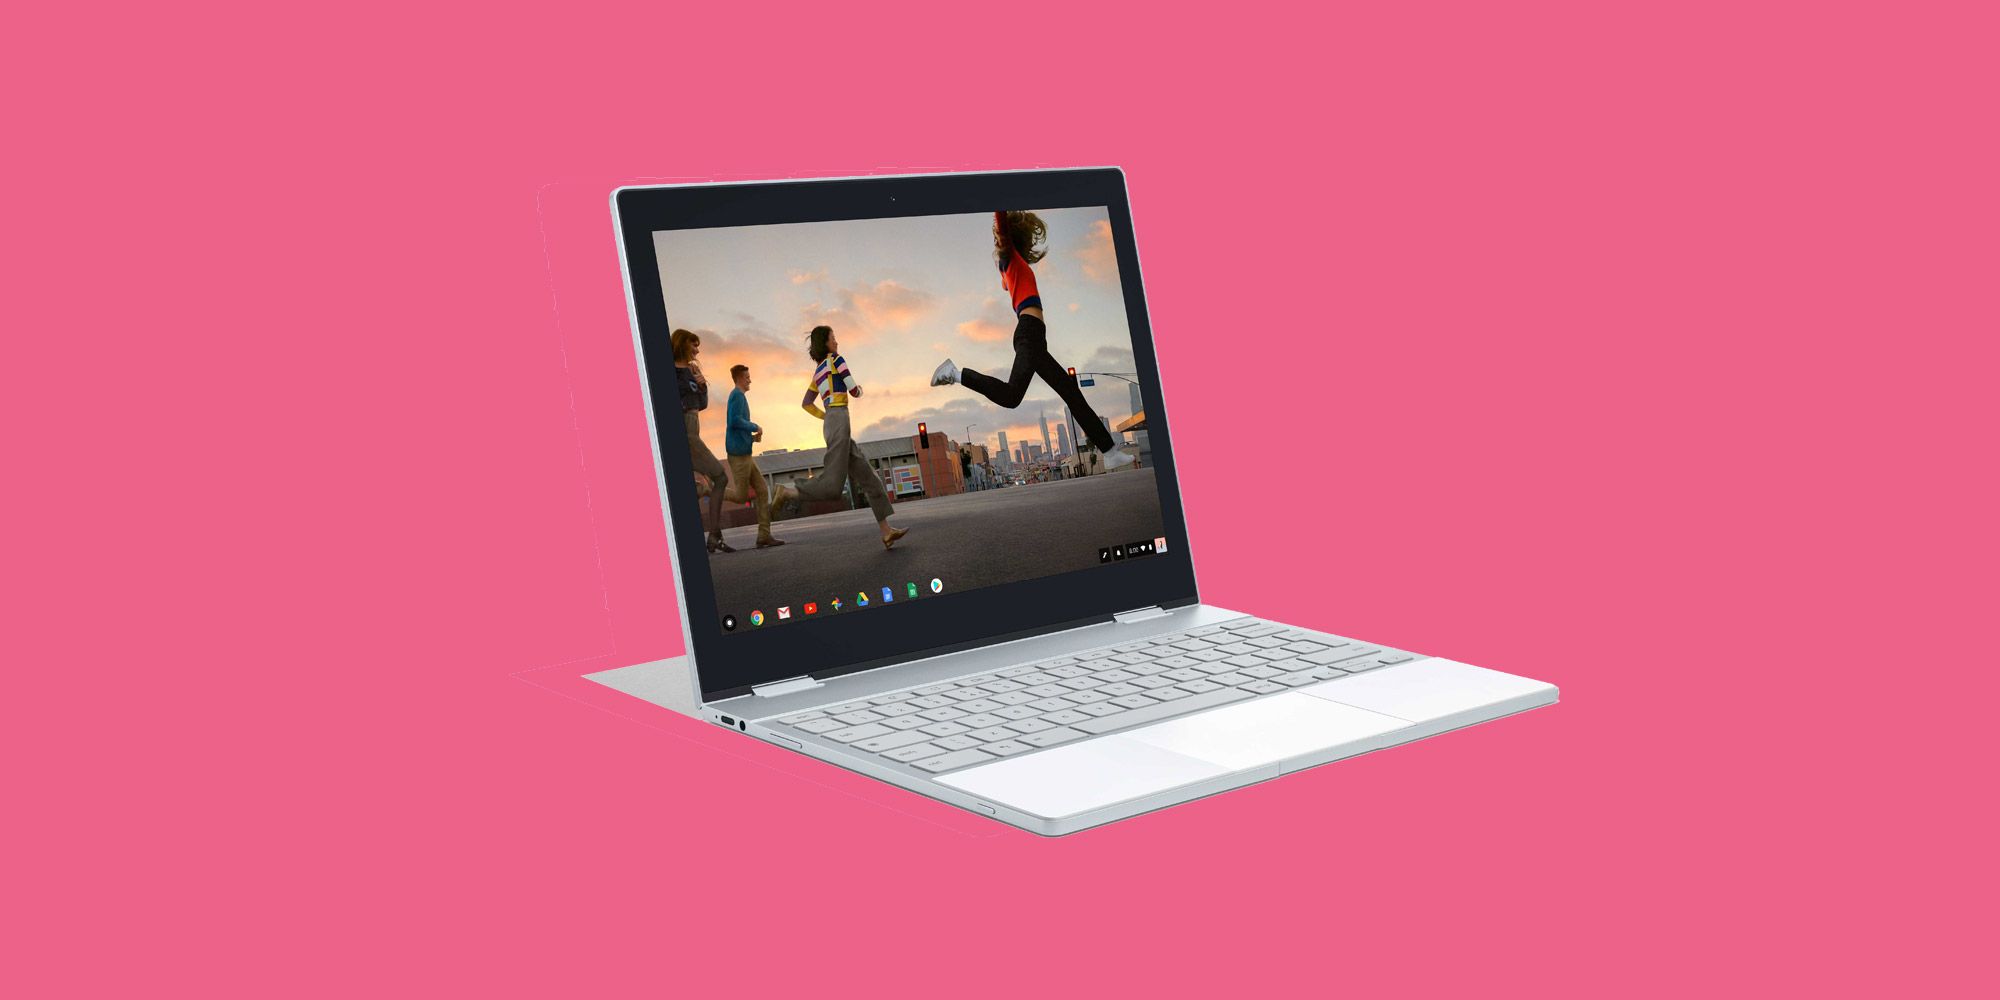 Google Pixelbook 2 Specs and Features Hybrid Laptop, CPU and Display Upgrades